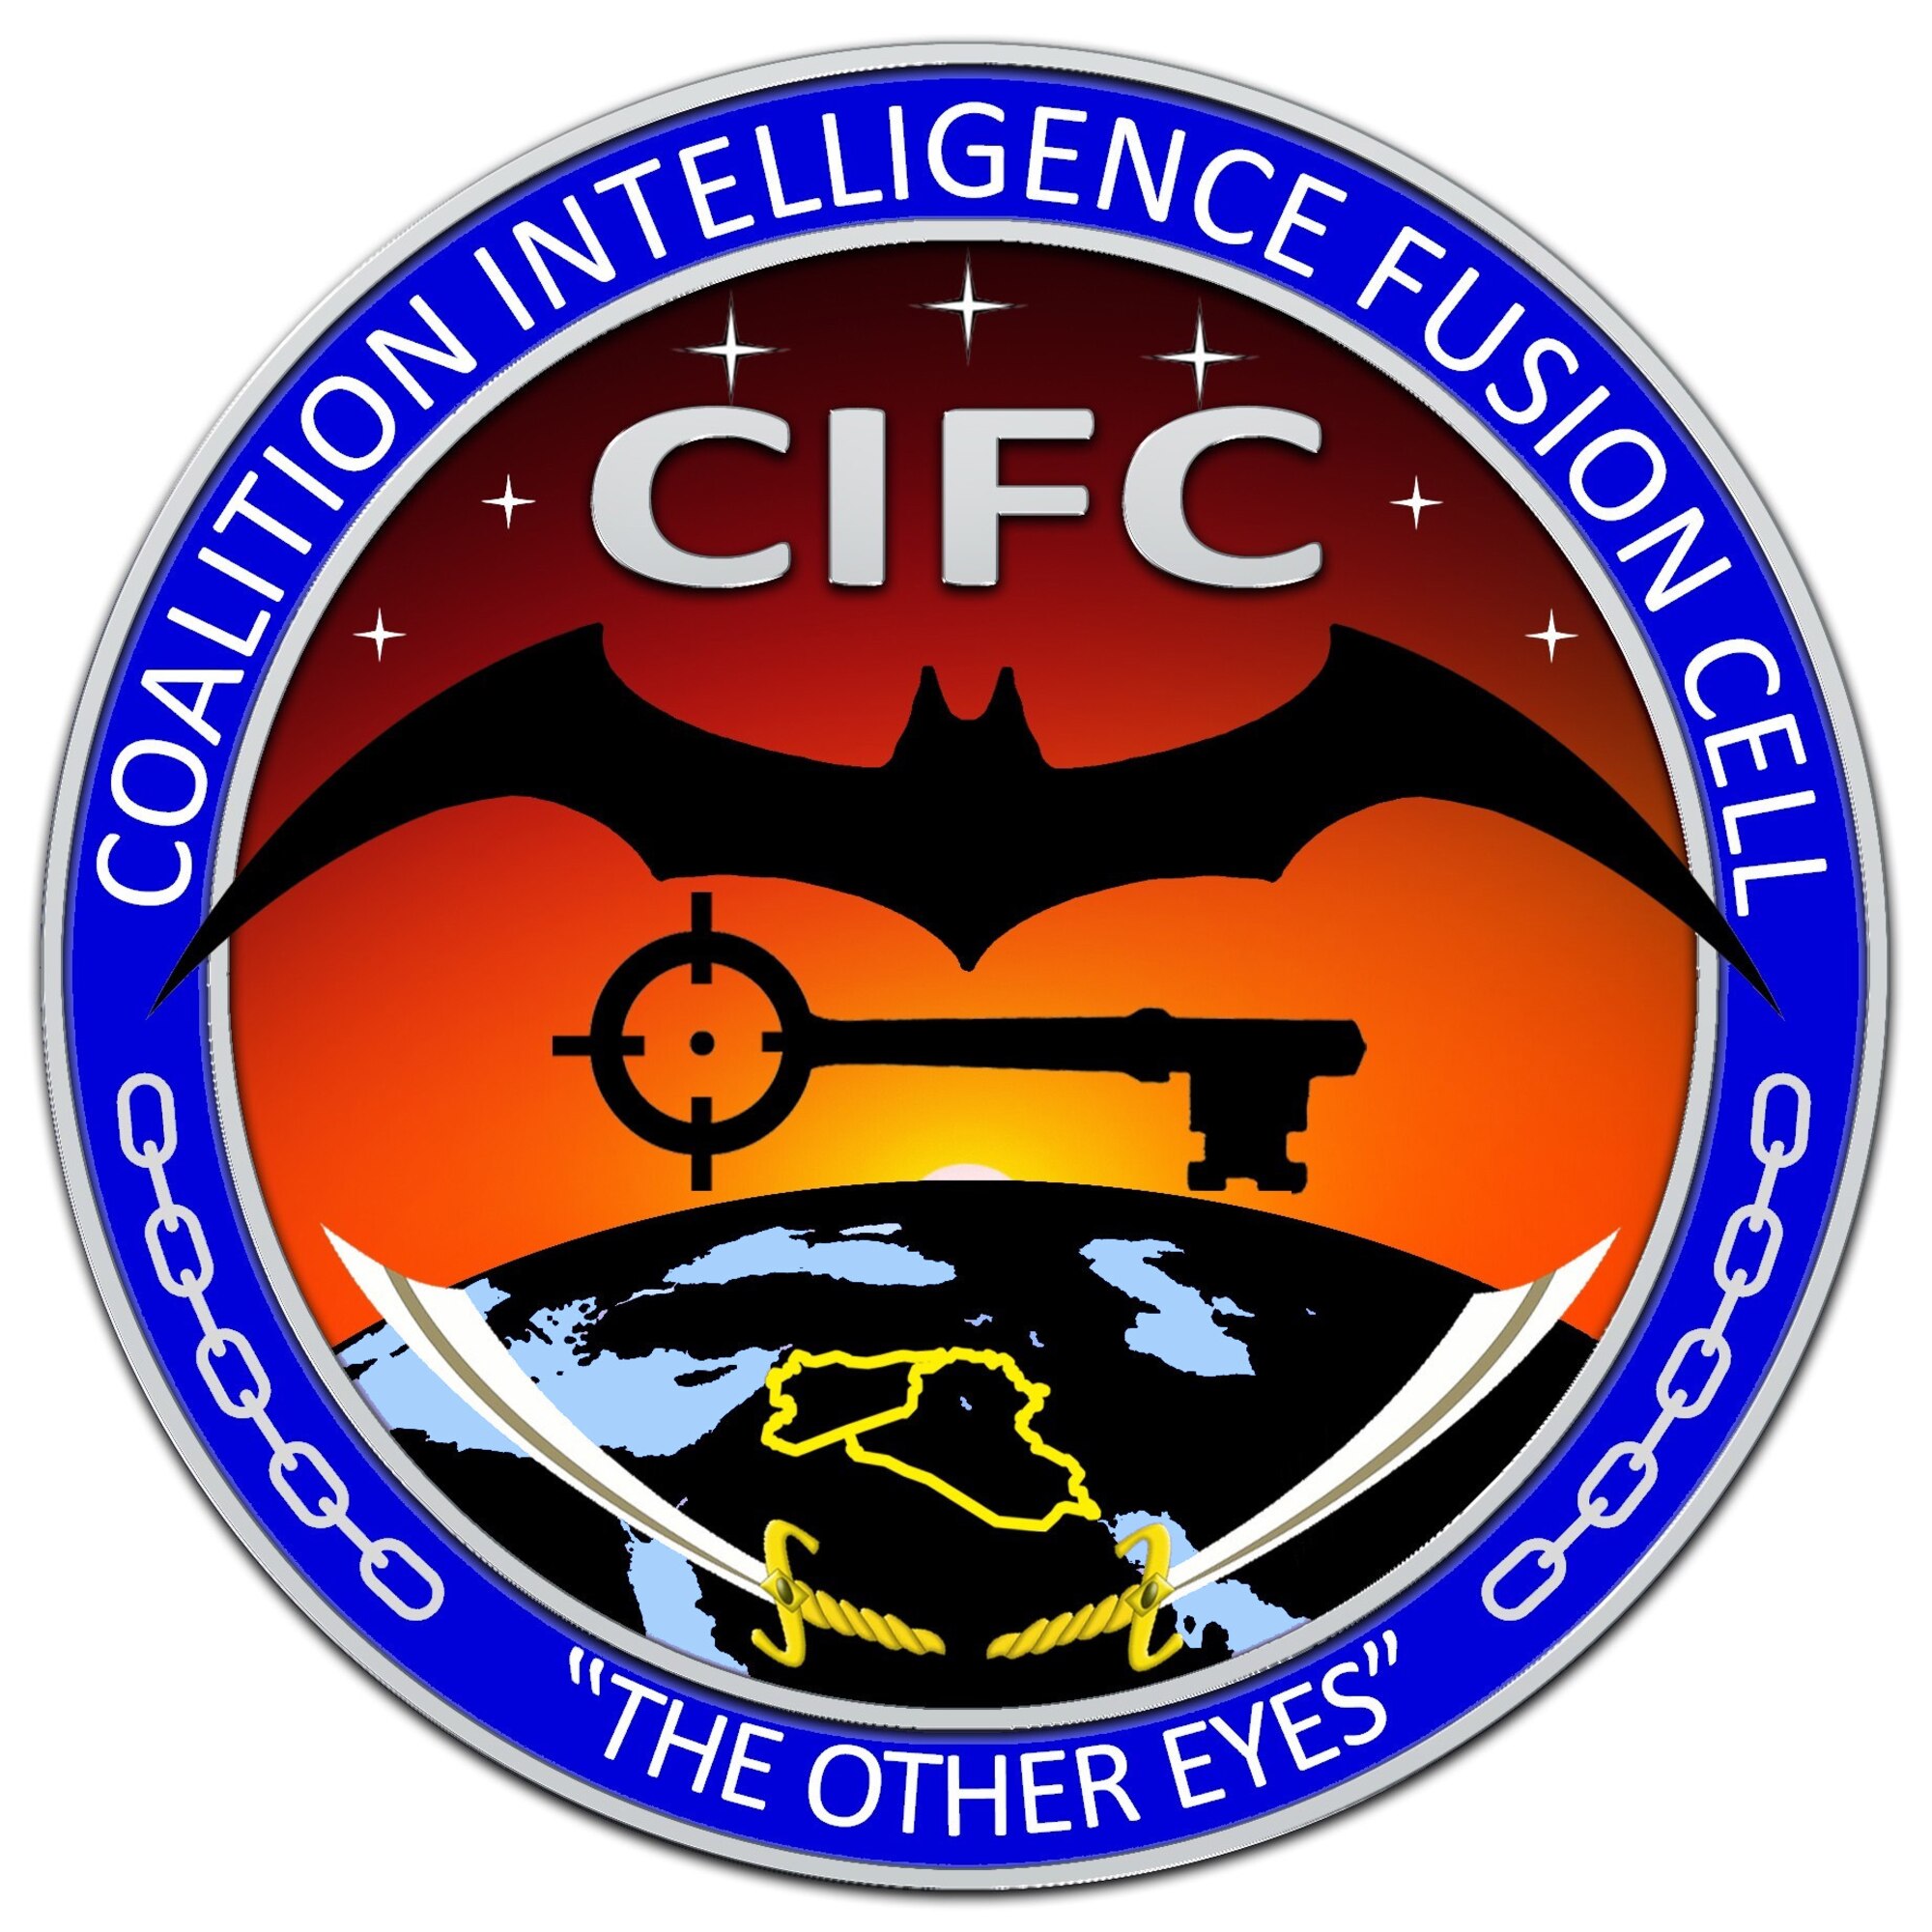 The Coalition Intelligence Fusion Cell is a diverse multinational team that plans, coordinates, develops and disseminates timely, relevant and accurate information among international partners and divisions within the Combined Air and Space Operations Center at Al Udeid Air Base, Qatar. Unlike other sections within the CAOC where divisions are U.S.-led and include international augmentees, the CIFC takes a completely multinational approach to intelligence gathering and information sharing. (U.S. Air Force courtesy photo)